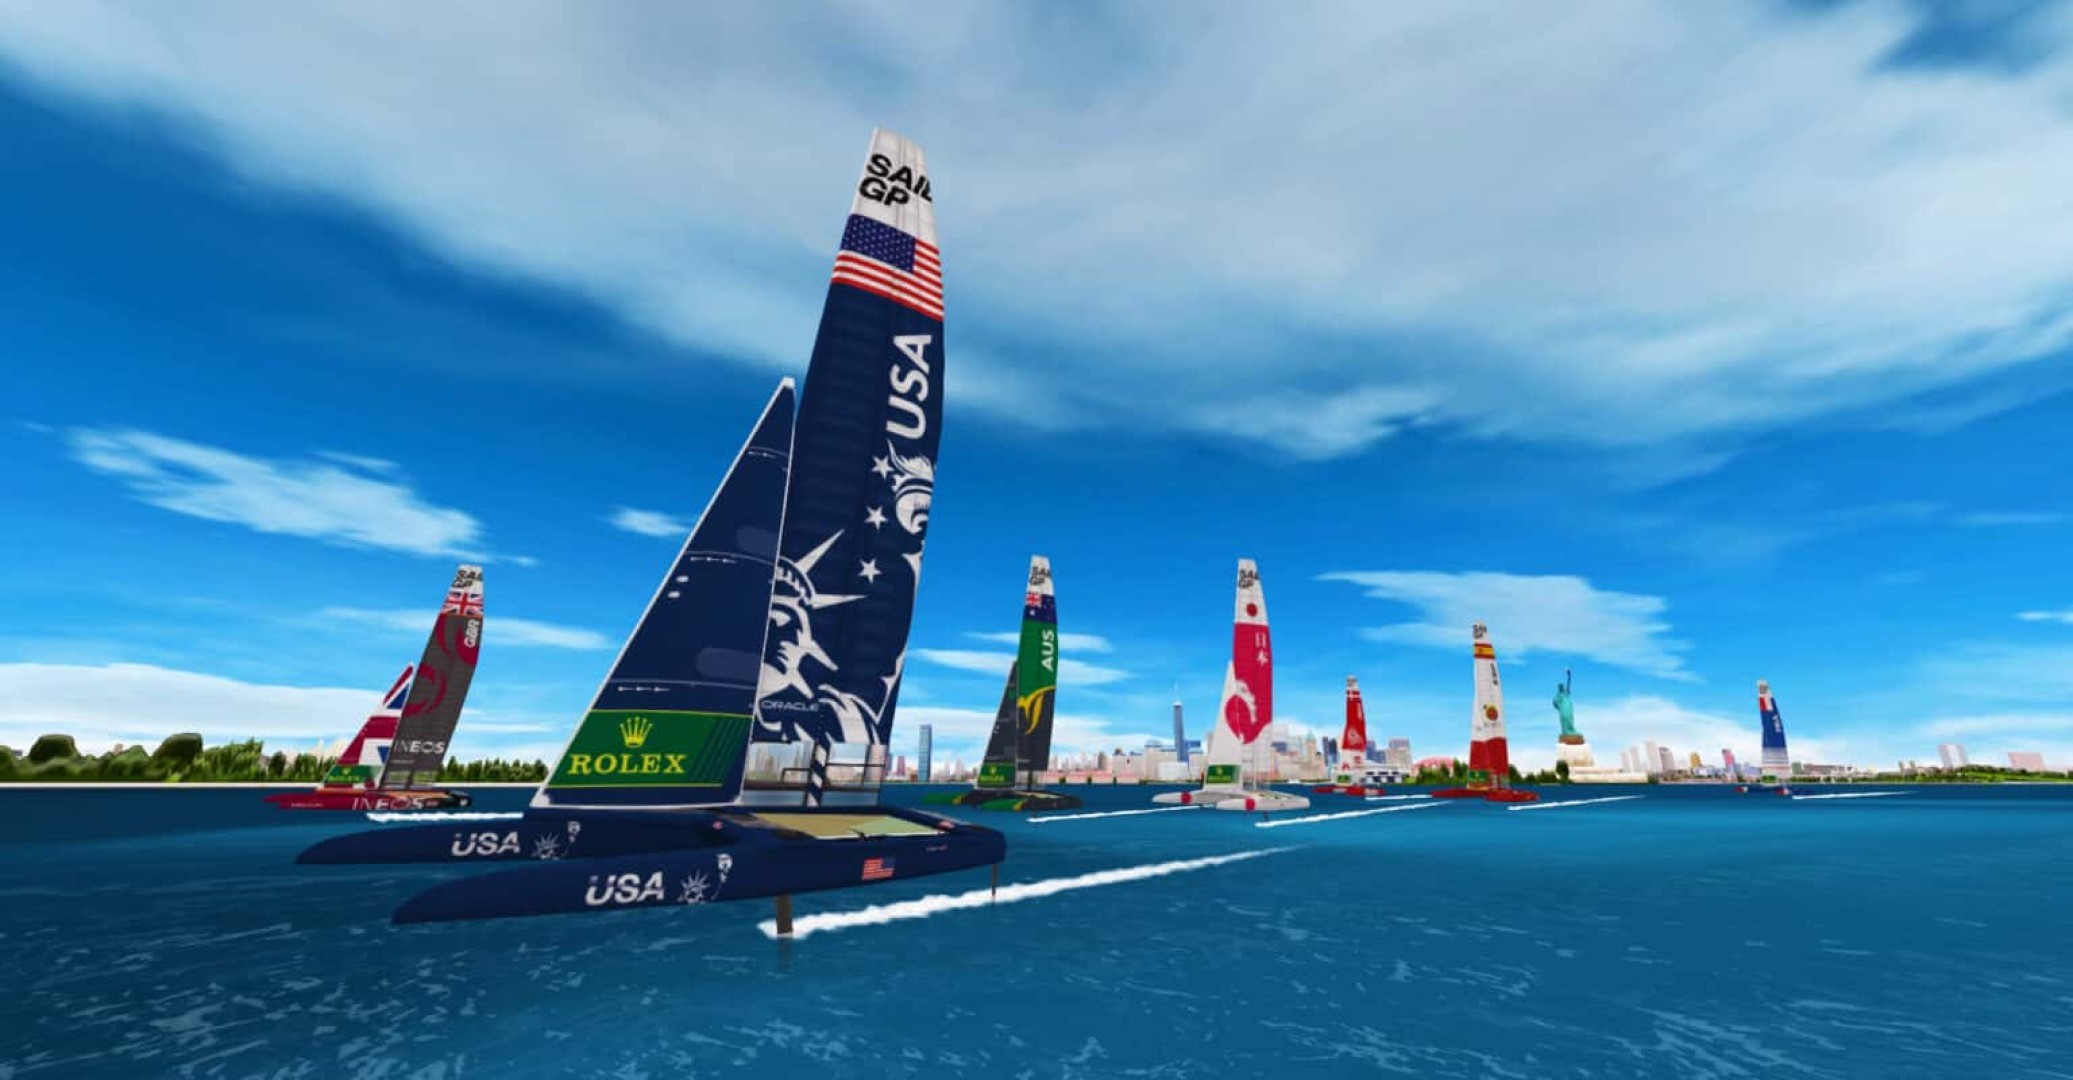 2022 eSailing World Championships open in style